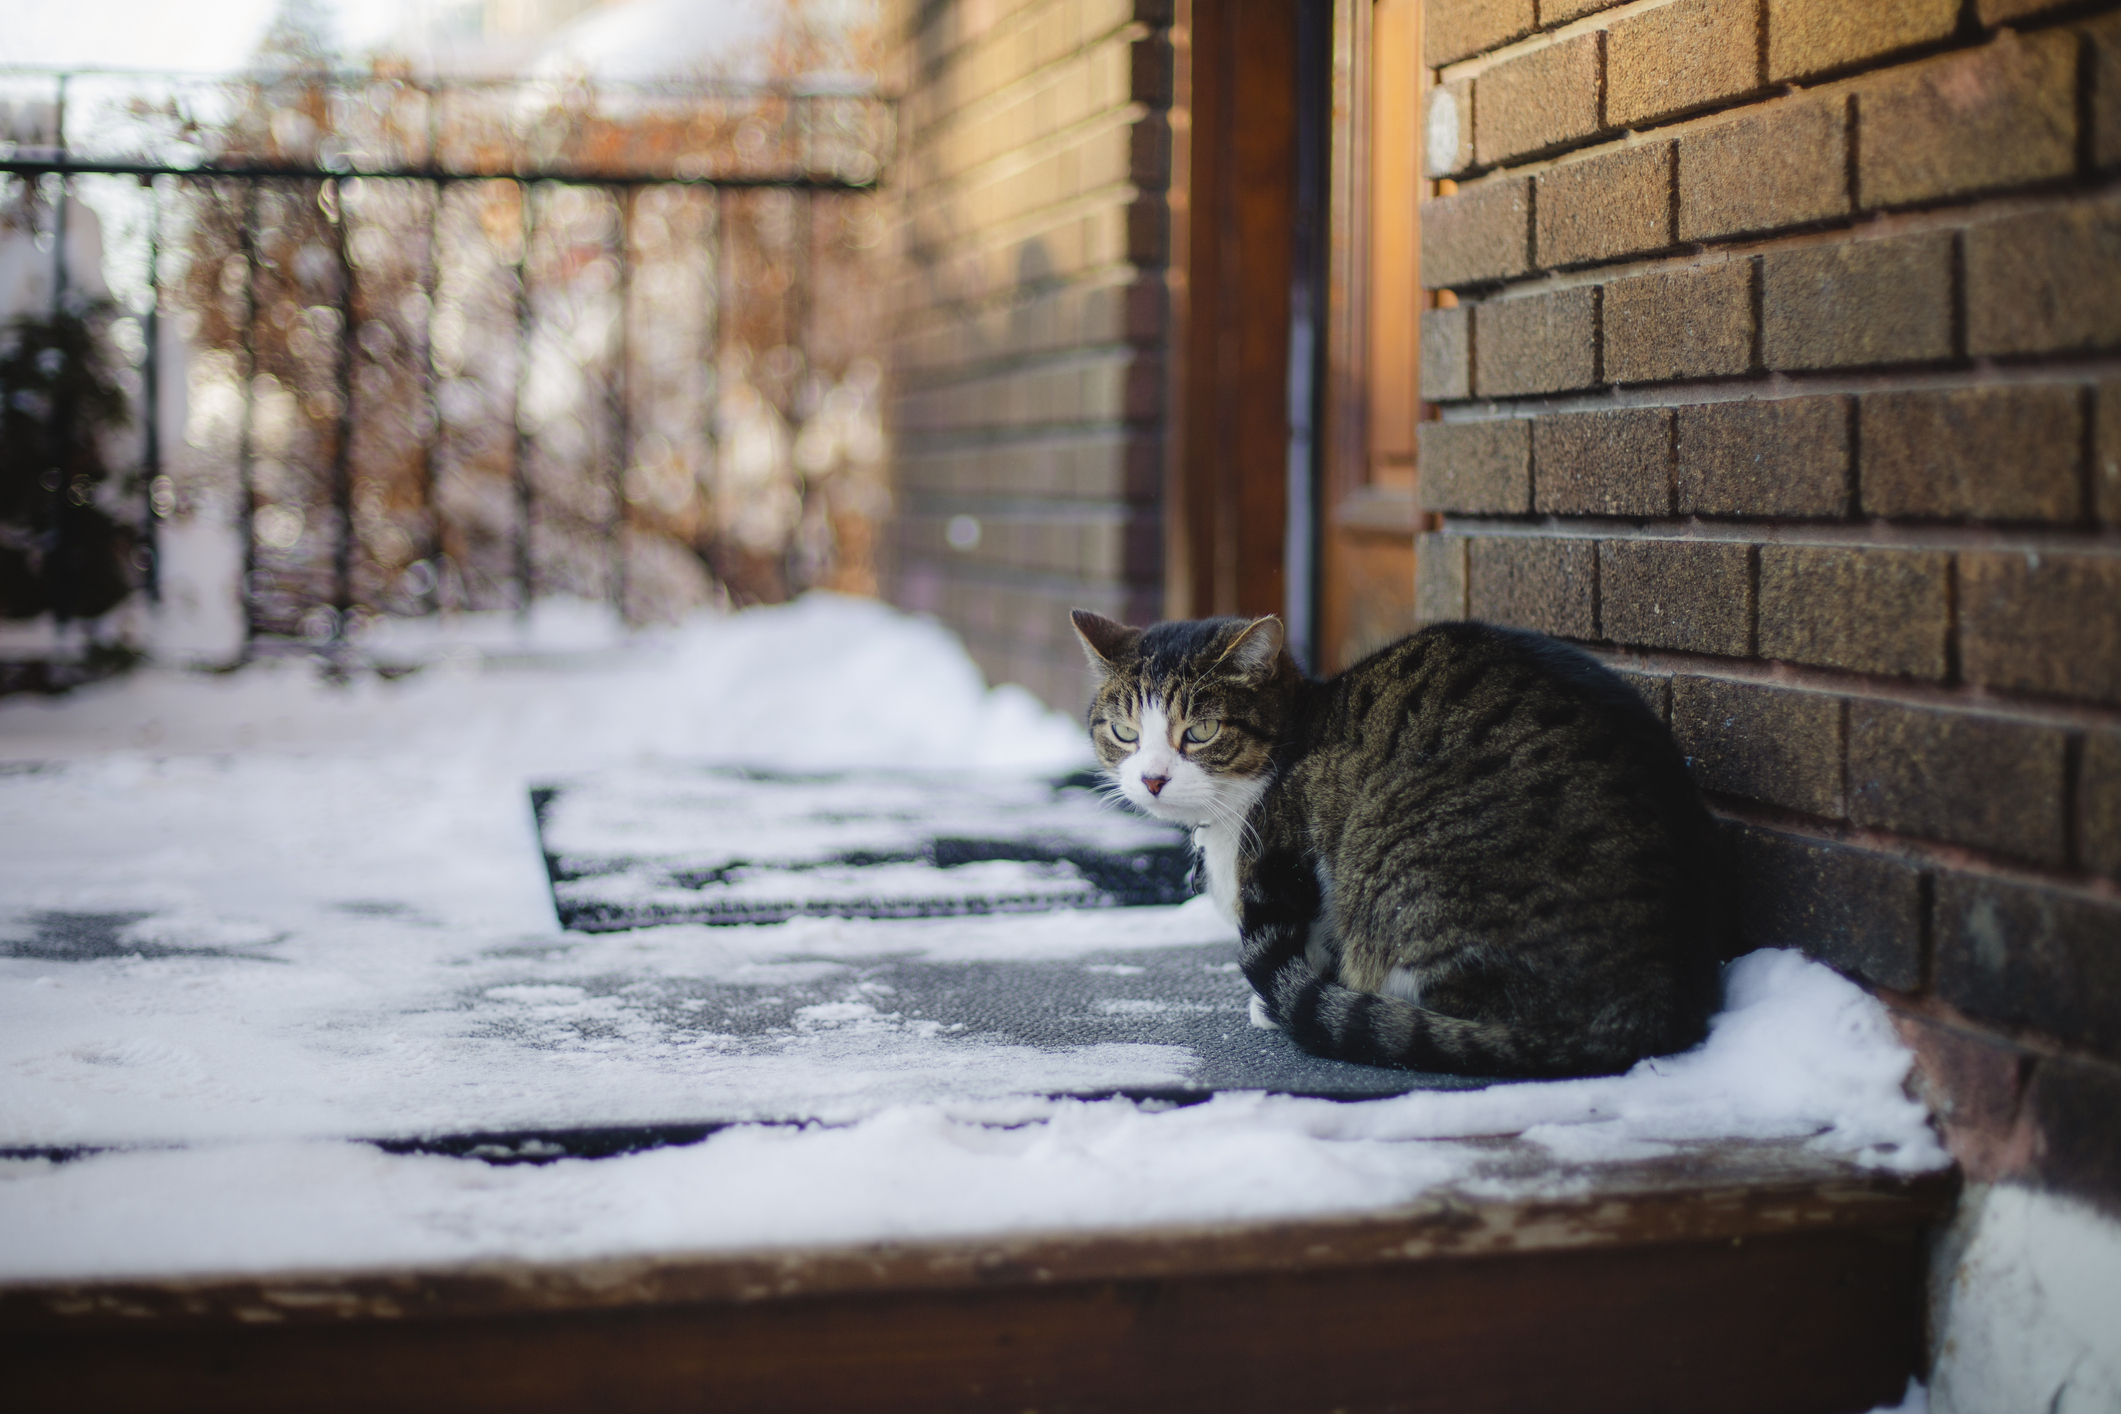 Tabby cat sitting outside a house on a snowy day